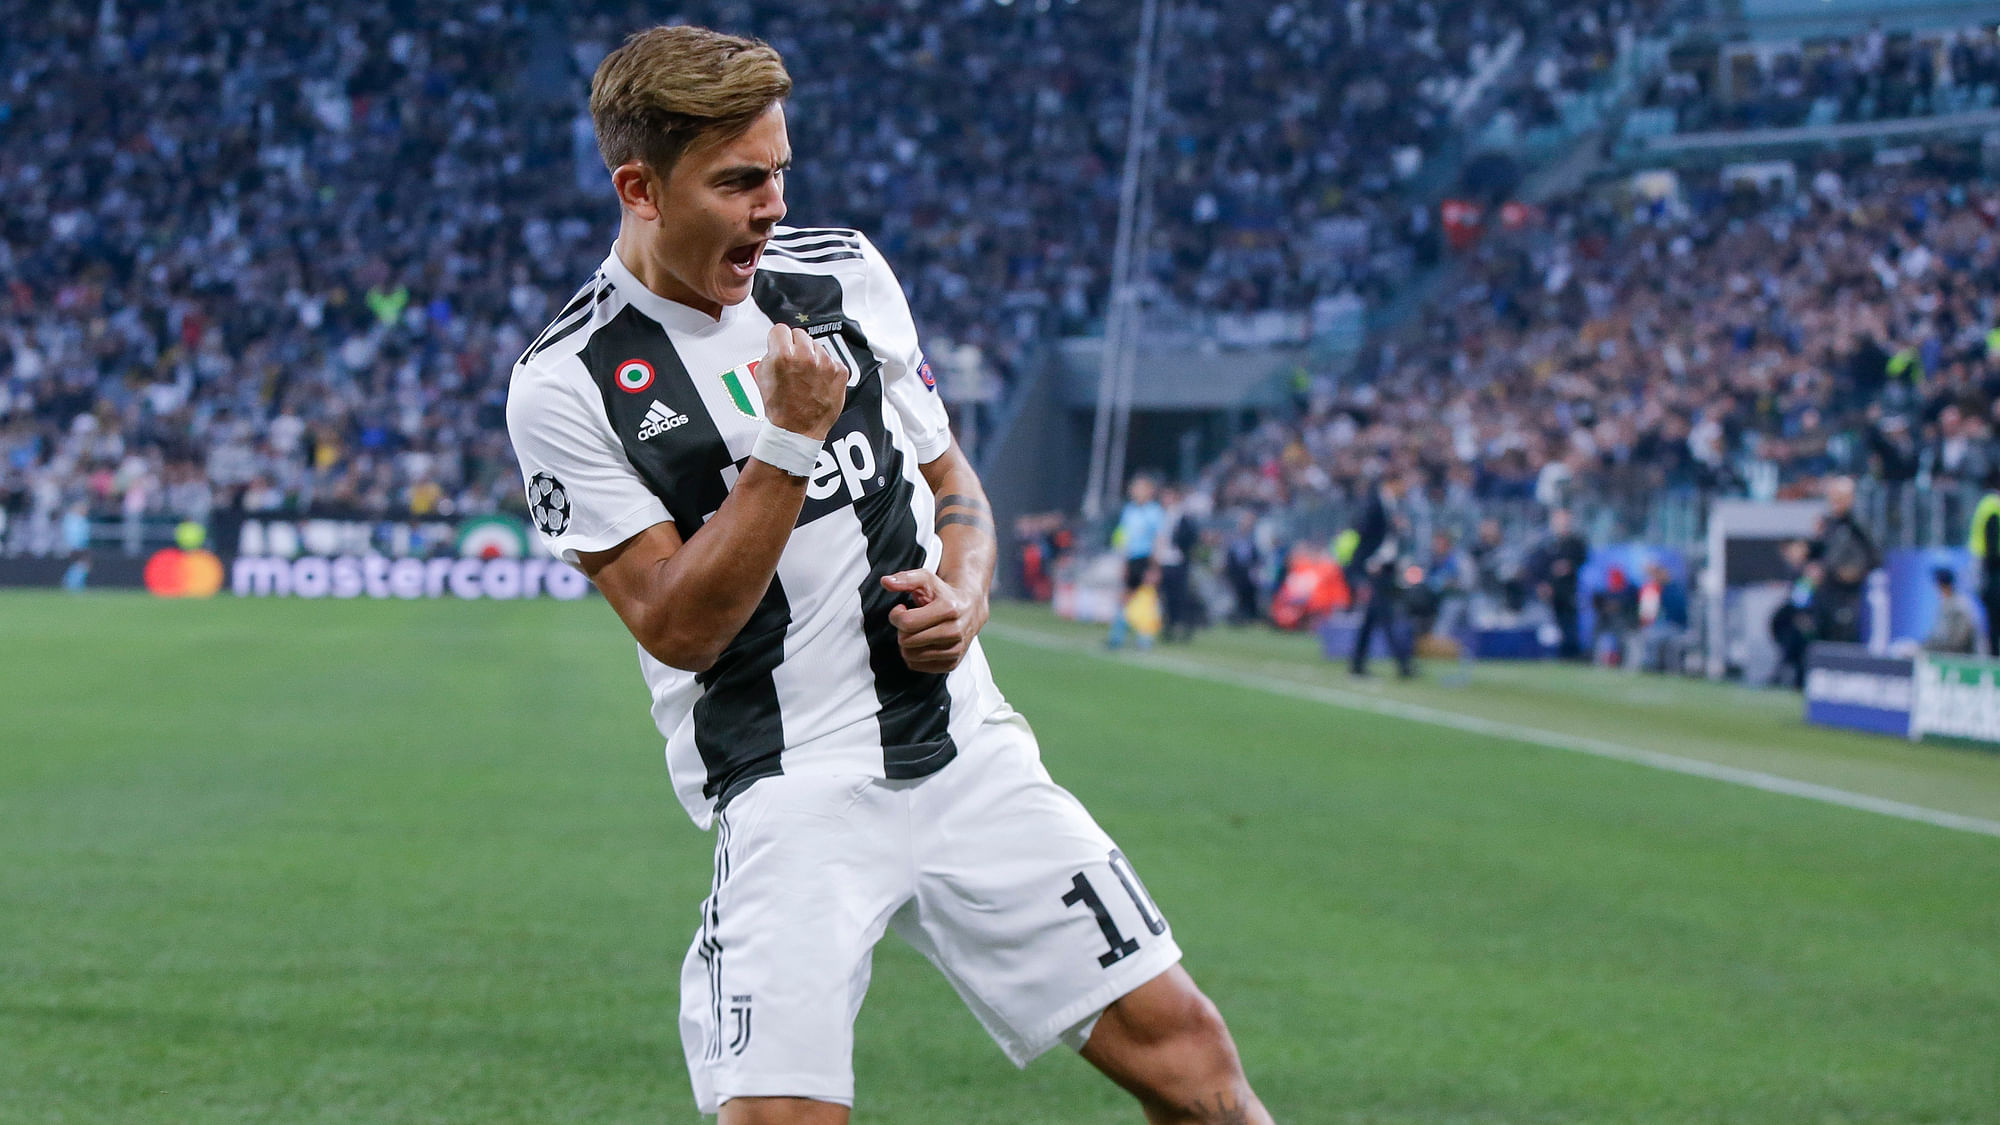 Paulo Dybala filled in for the star by scoring his first Champions League hat trick to give the Italian team a 3-0 victory over Young Boys.